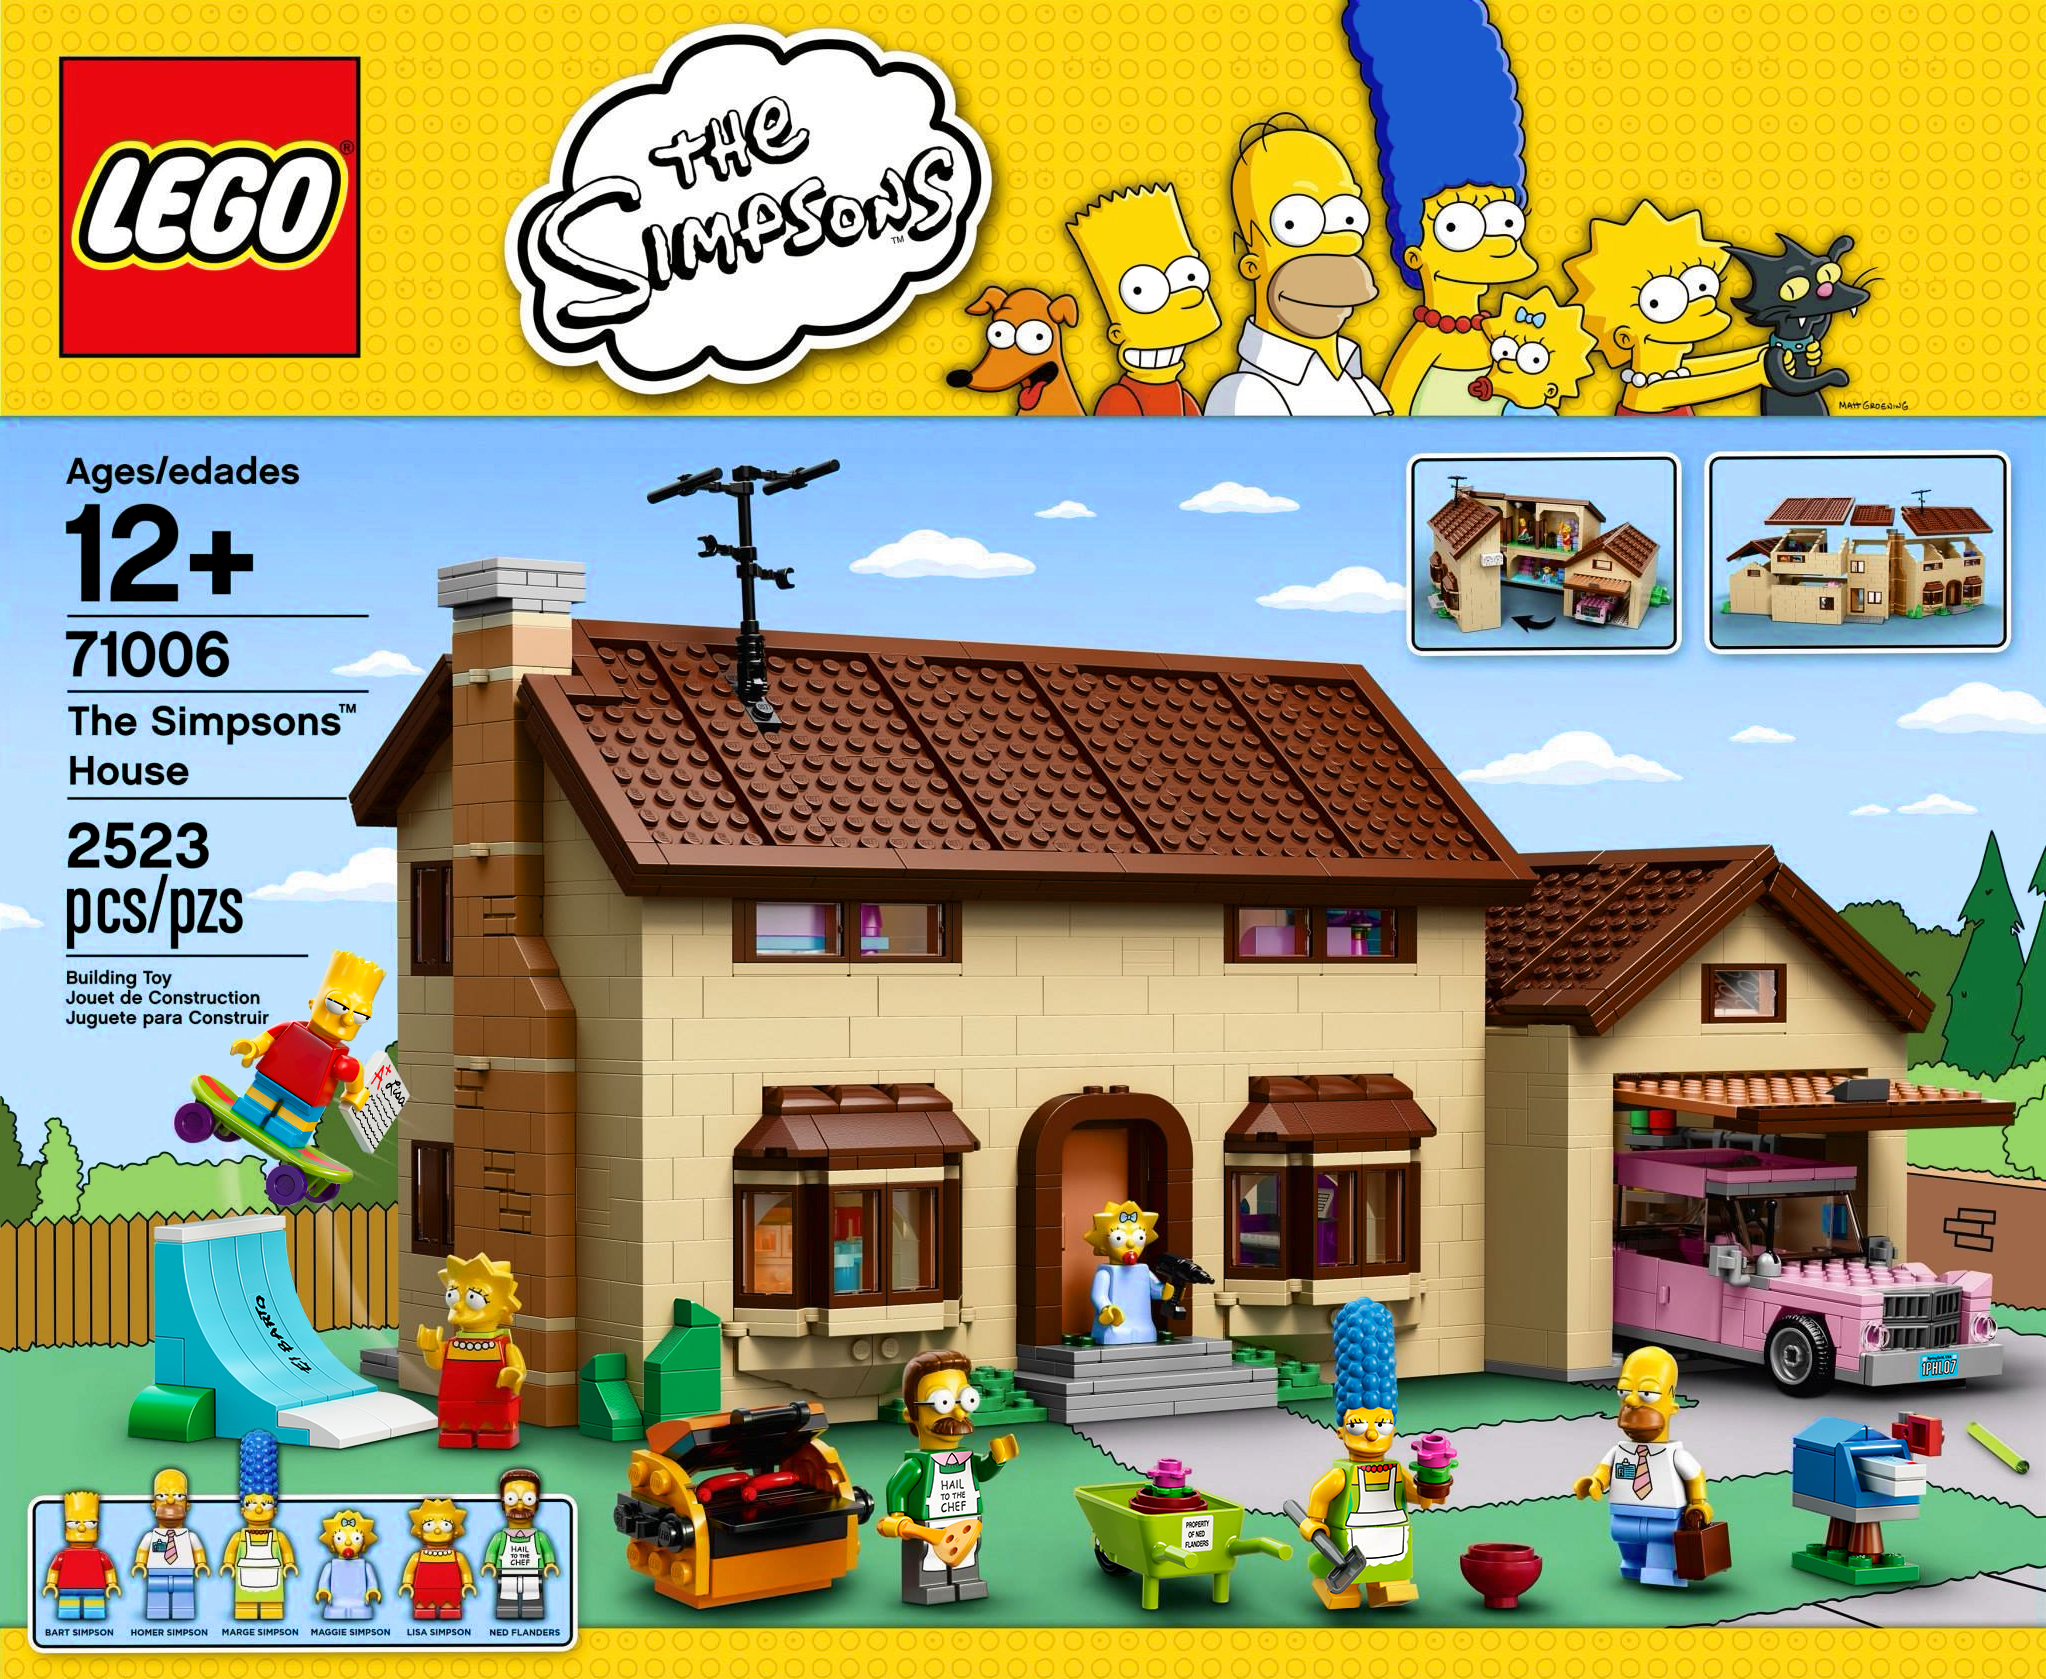 After 2 years in the making, 'The Simpsons' Lego special set to air